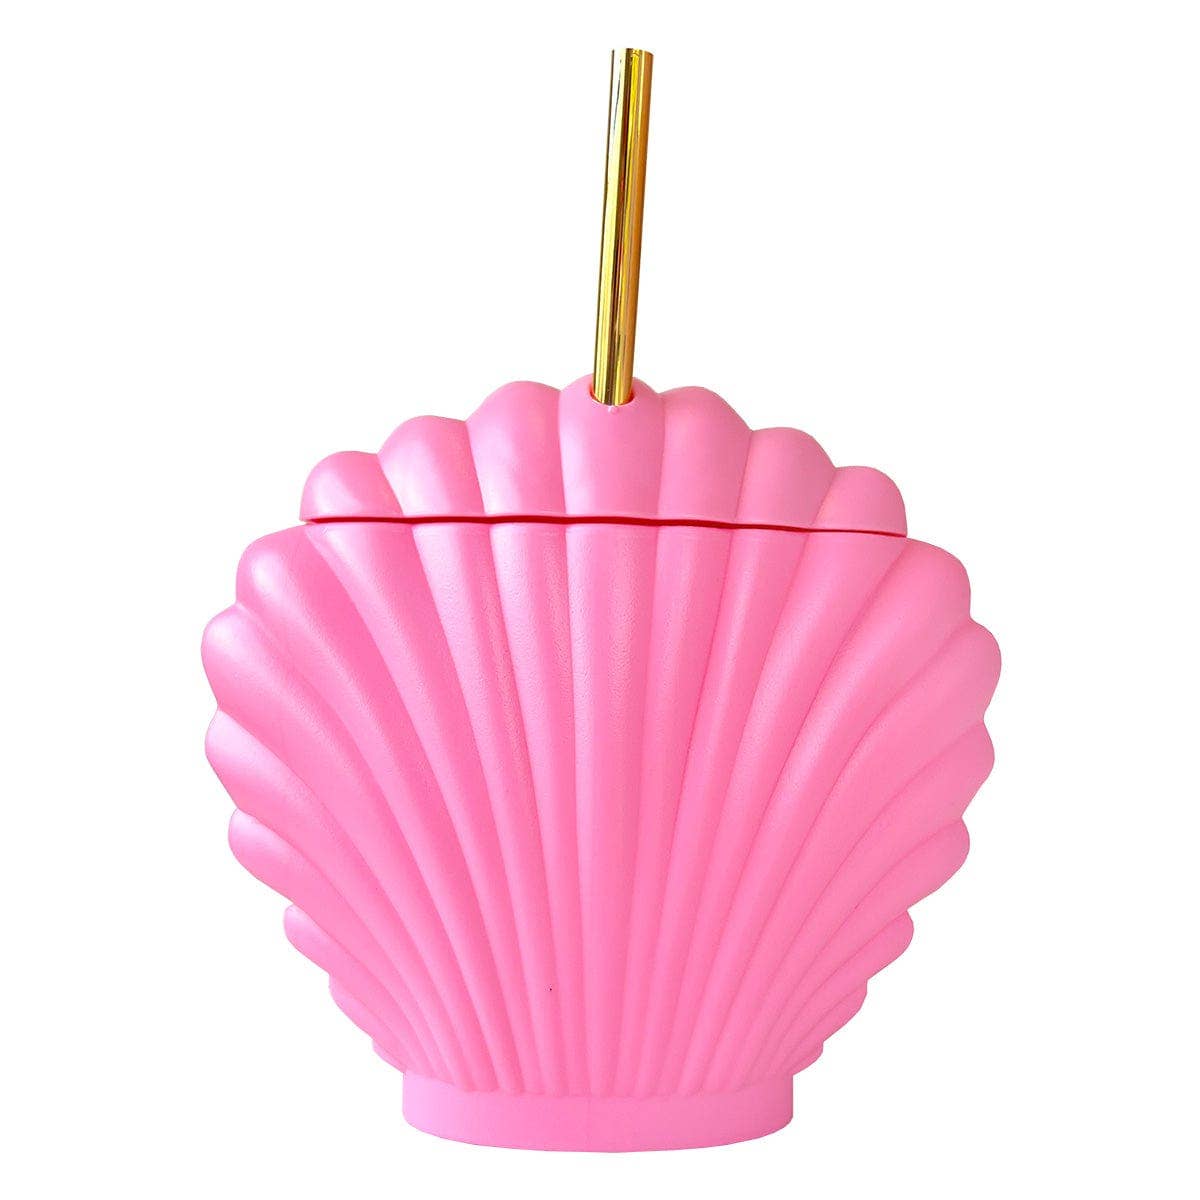 The Shell-ebrate Sipper